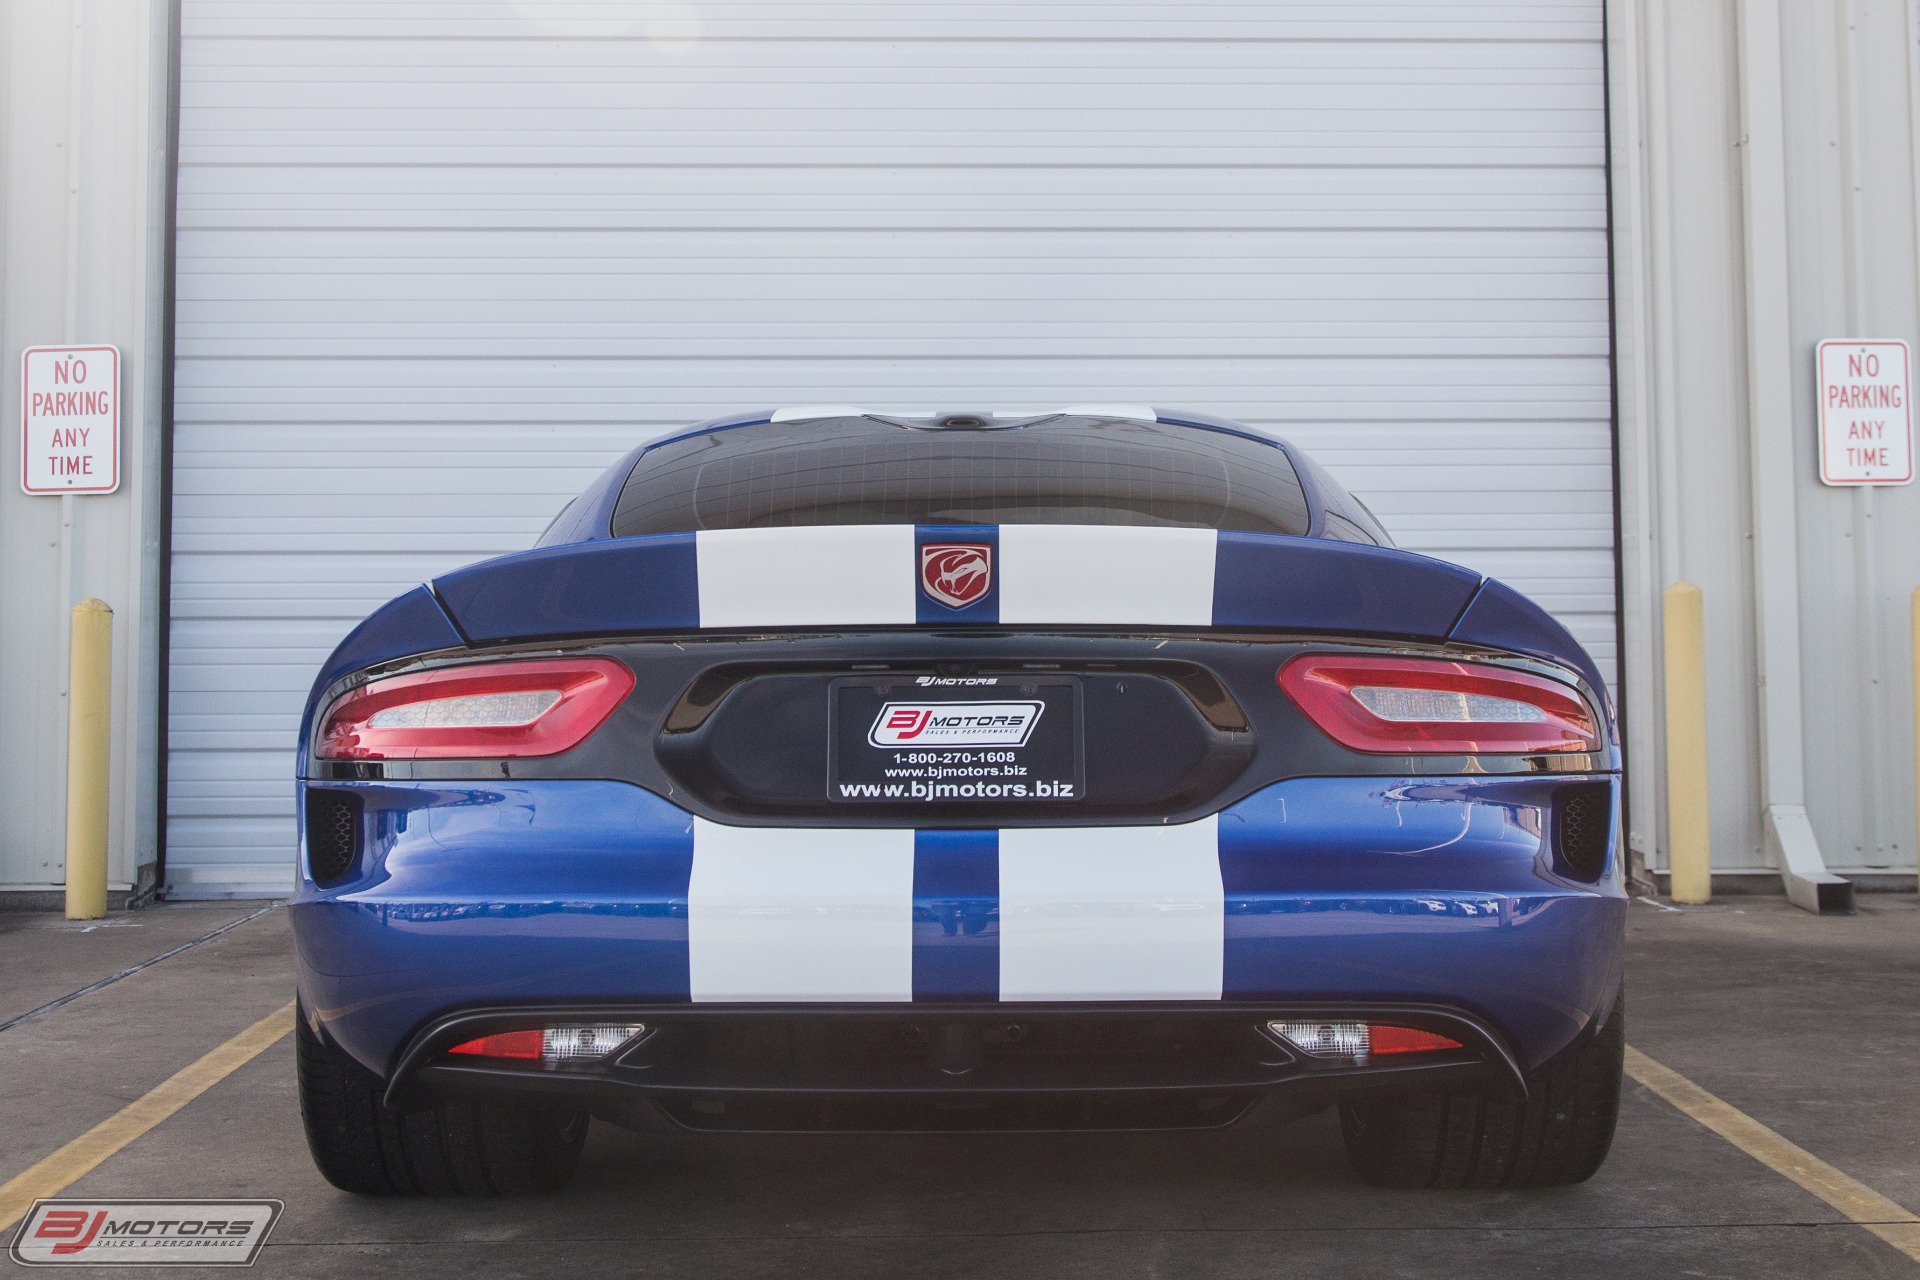 Used-2013-Dodge-Viper-GTS-Launch-Edition